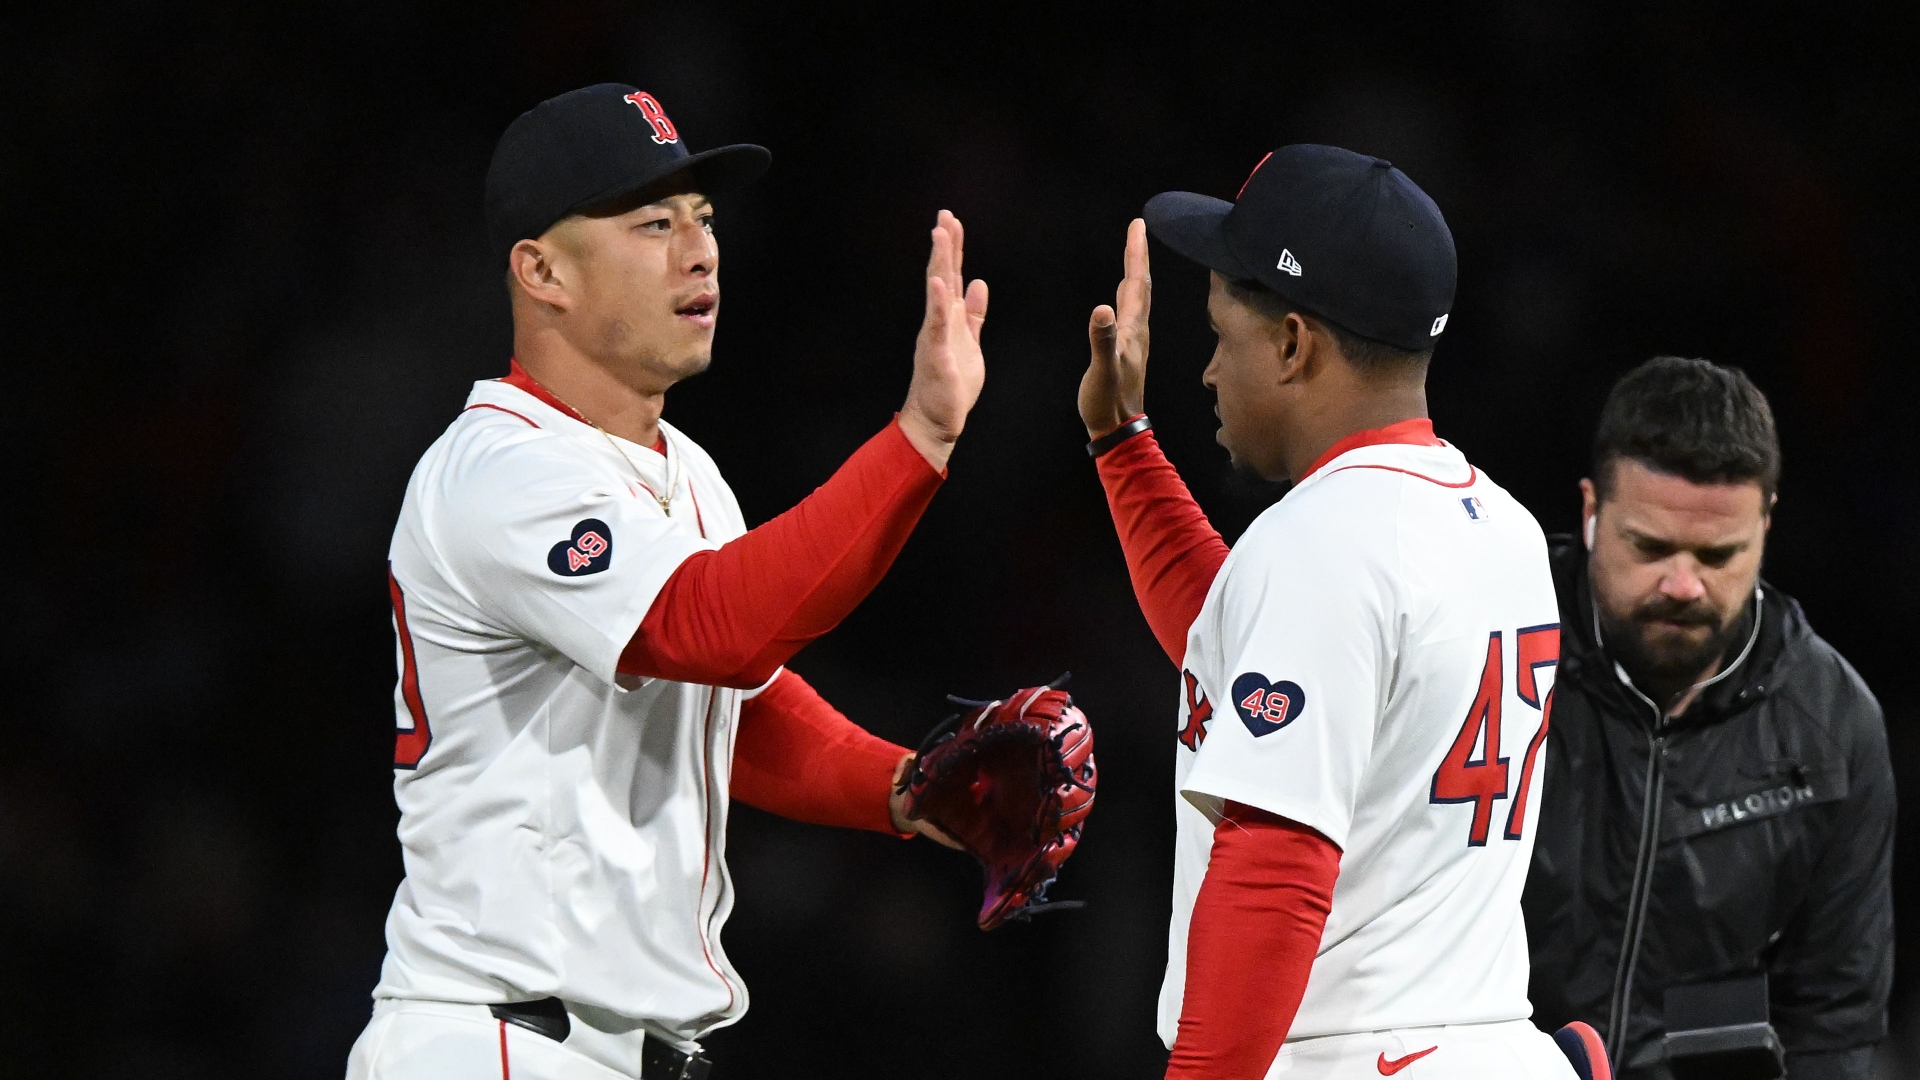 Red Sox Expand Role Of Young Bat, Hope For Big League Return